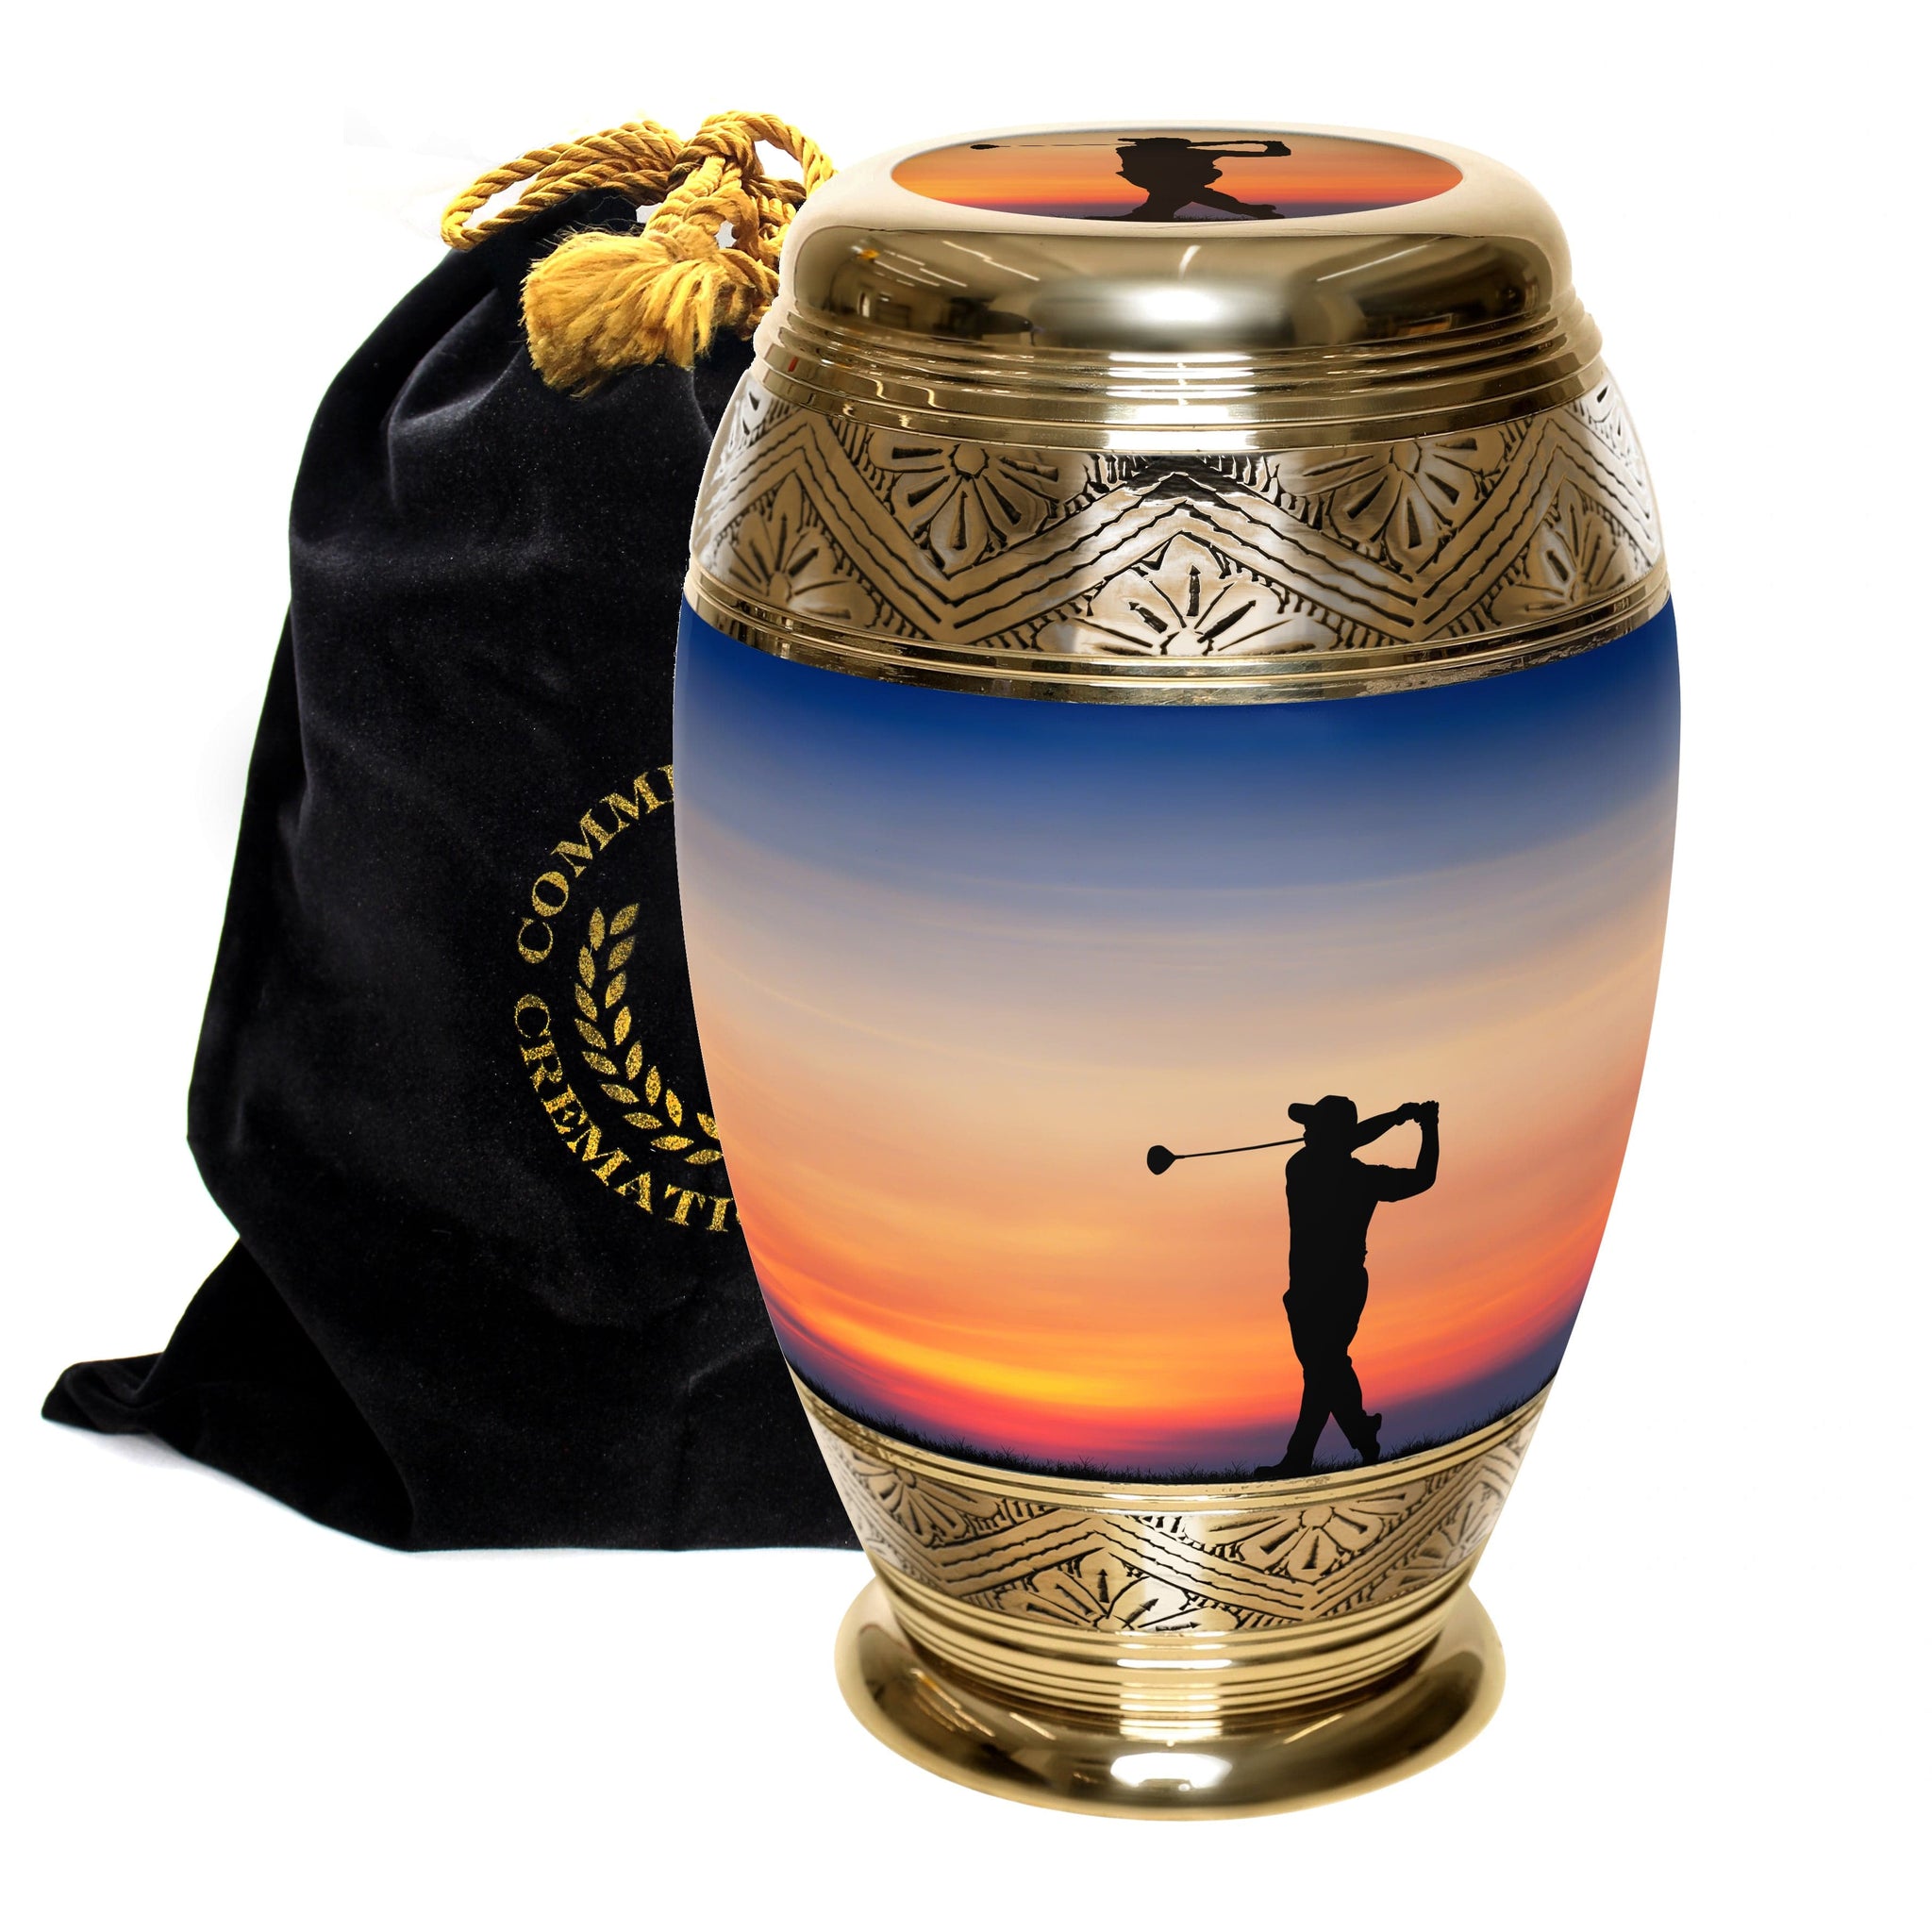 Gone Golfing Cremation Urns for Human Ashes adult Urns for Cremation Ashes Urns for adult Cremation Ashes Urns for Ashes Cremation Urns for Human